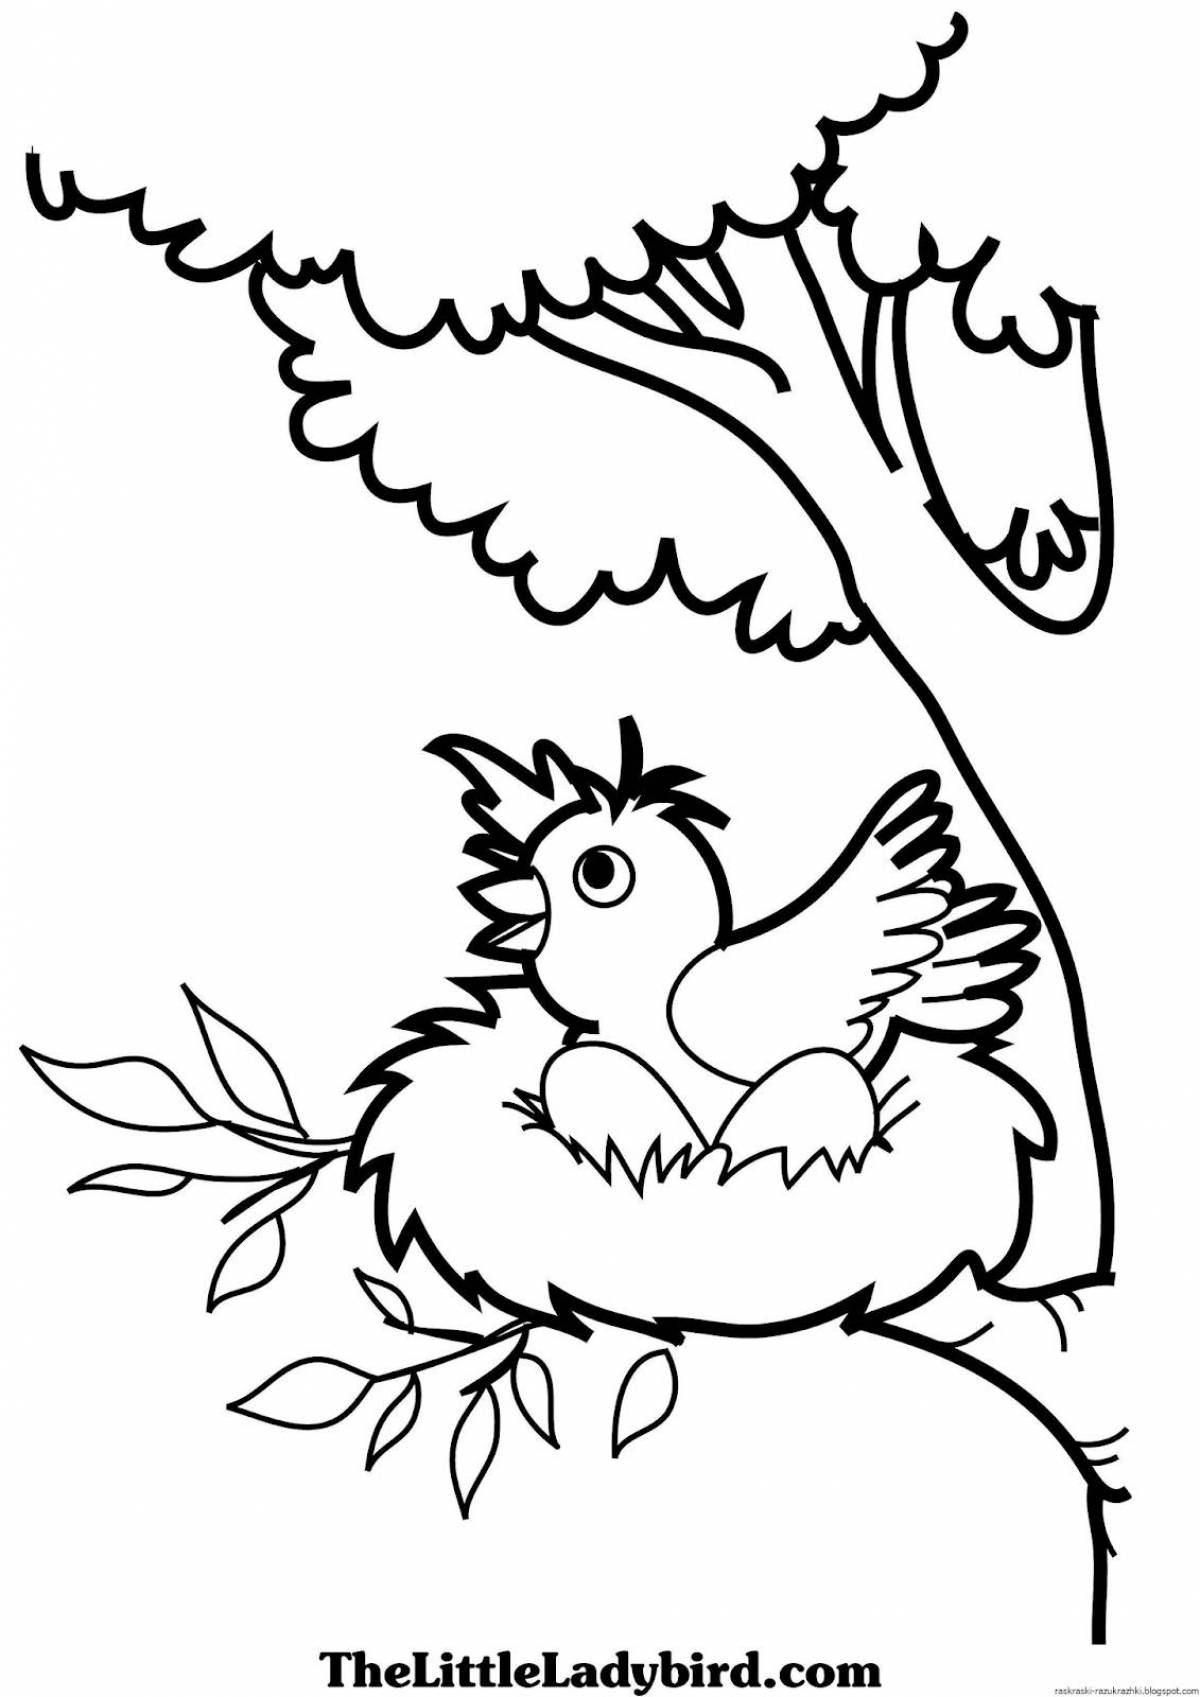 Fun bird coloring pages for kids